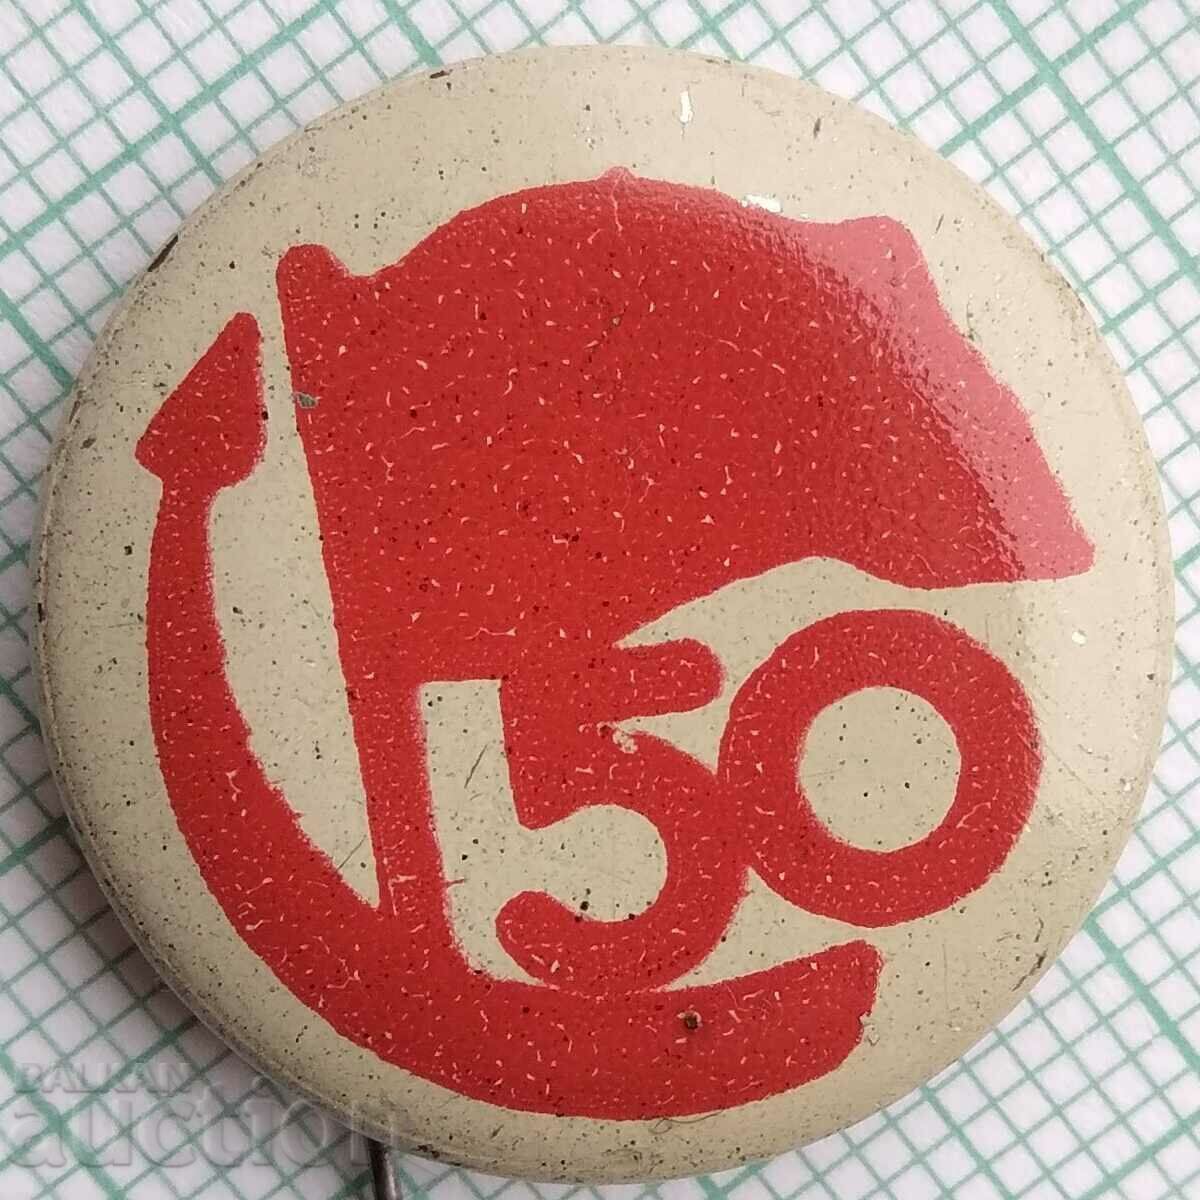 15210 Badge - 50 years of the October Revolution